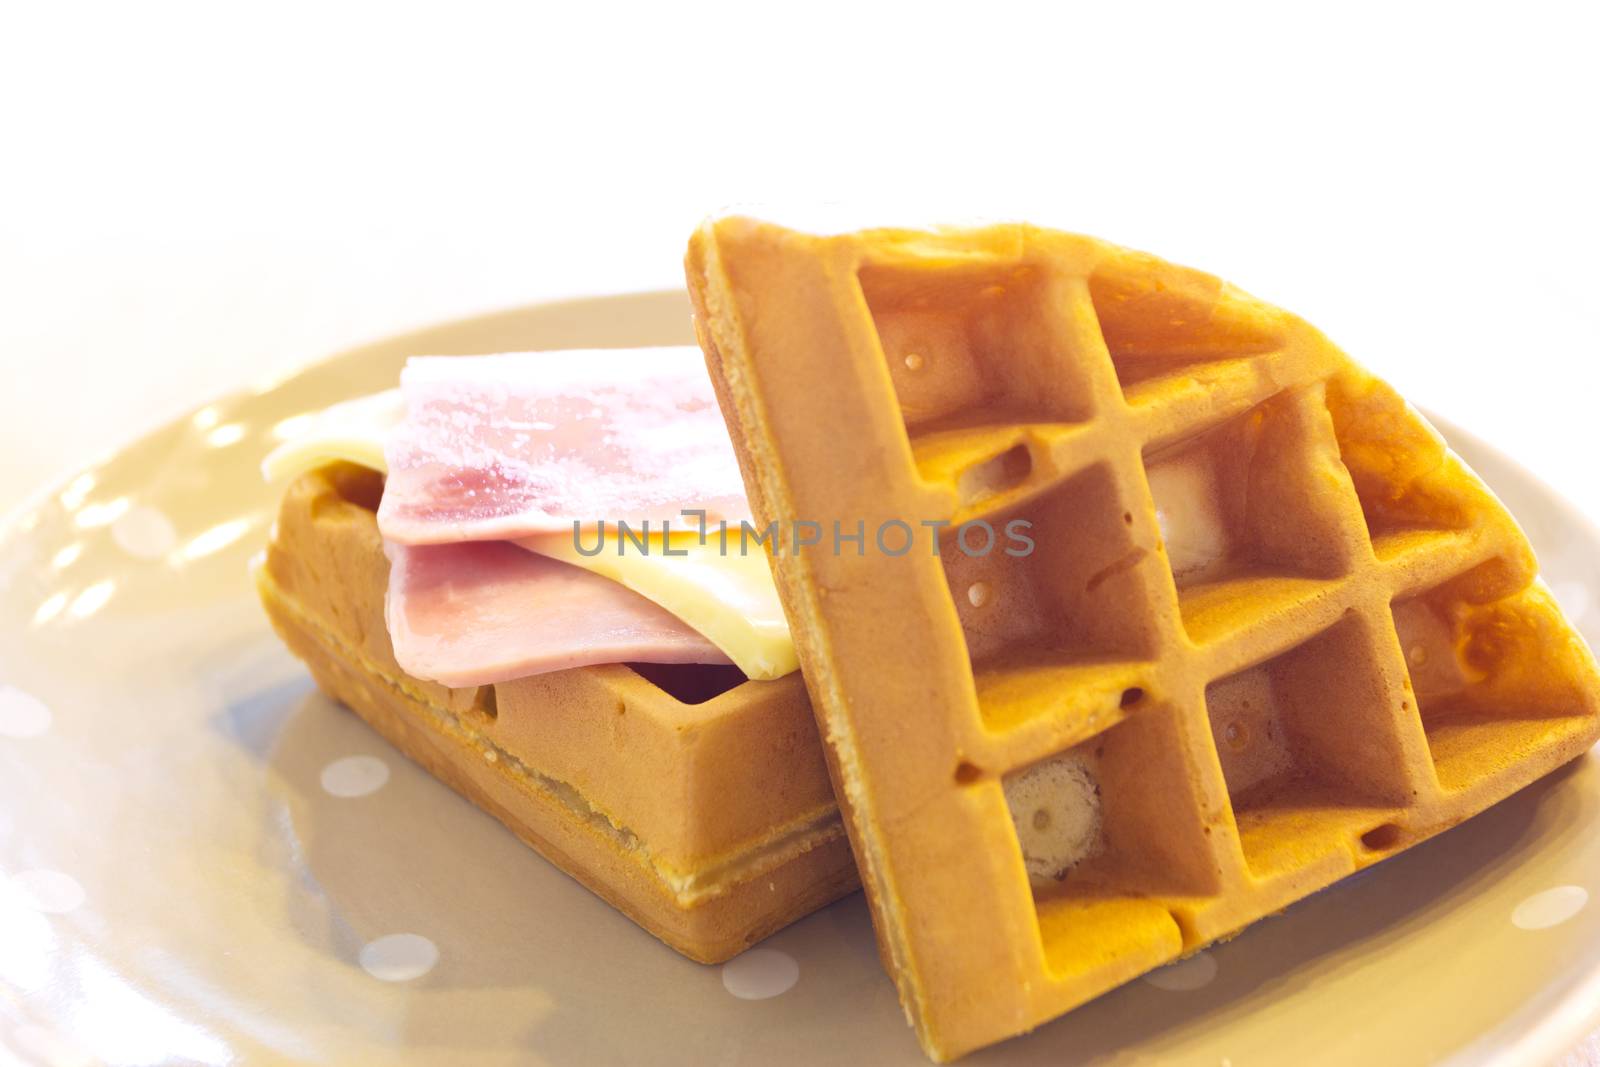 Waffles with ham and cheese on a plate by wyoosumran